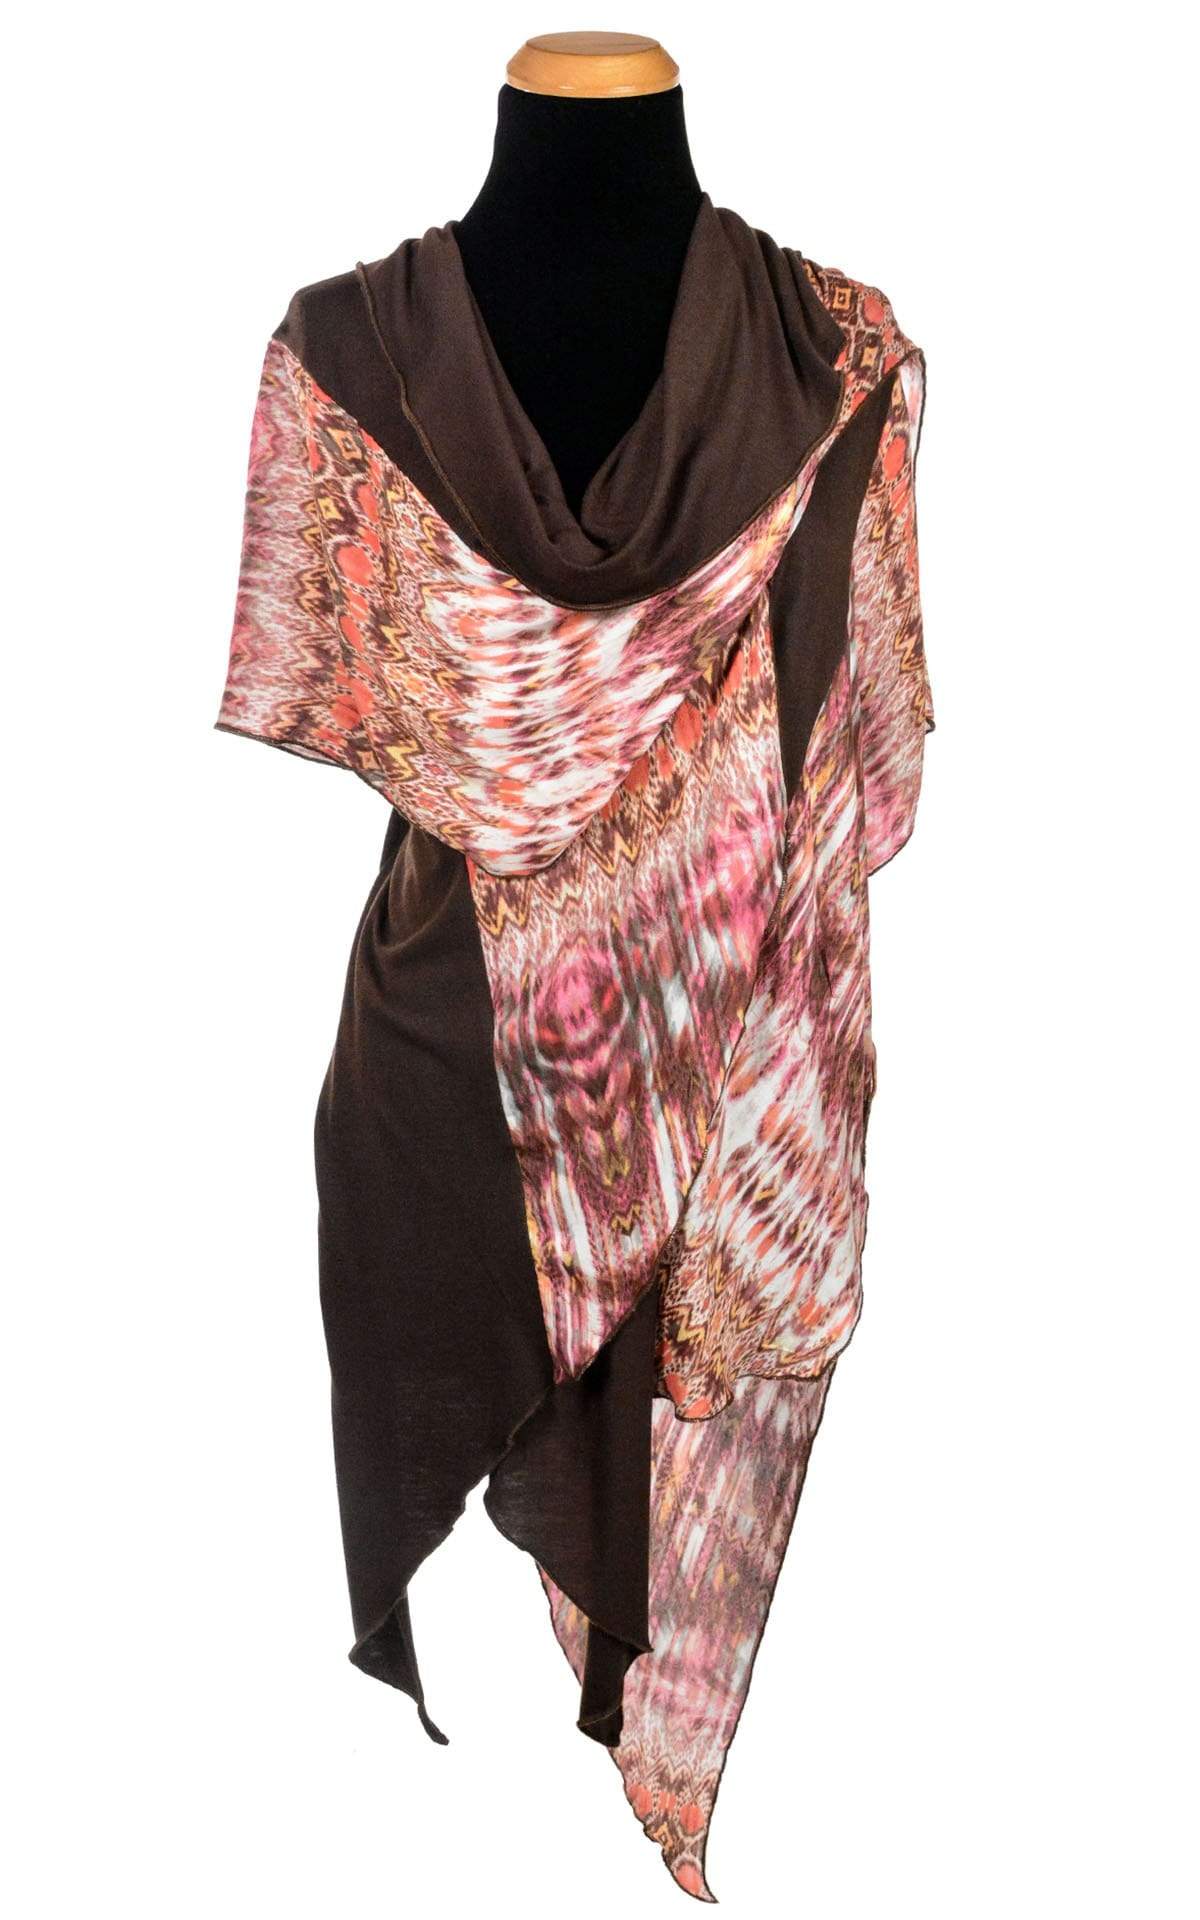 Kaftan Cover Up Draped - Pink Dream with Terra Jersey Knit Apparel | Handmade by Pandemonium Millinery